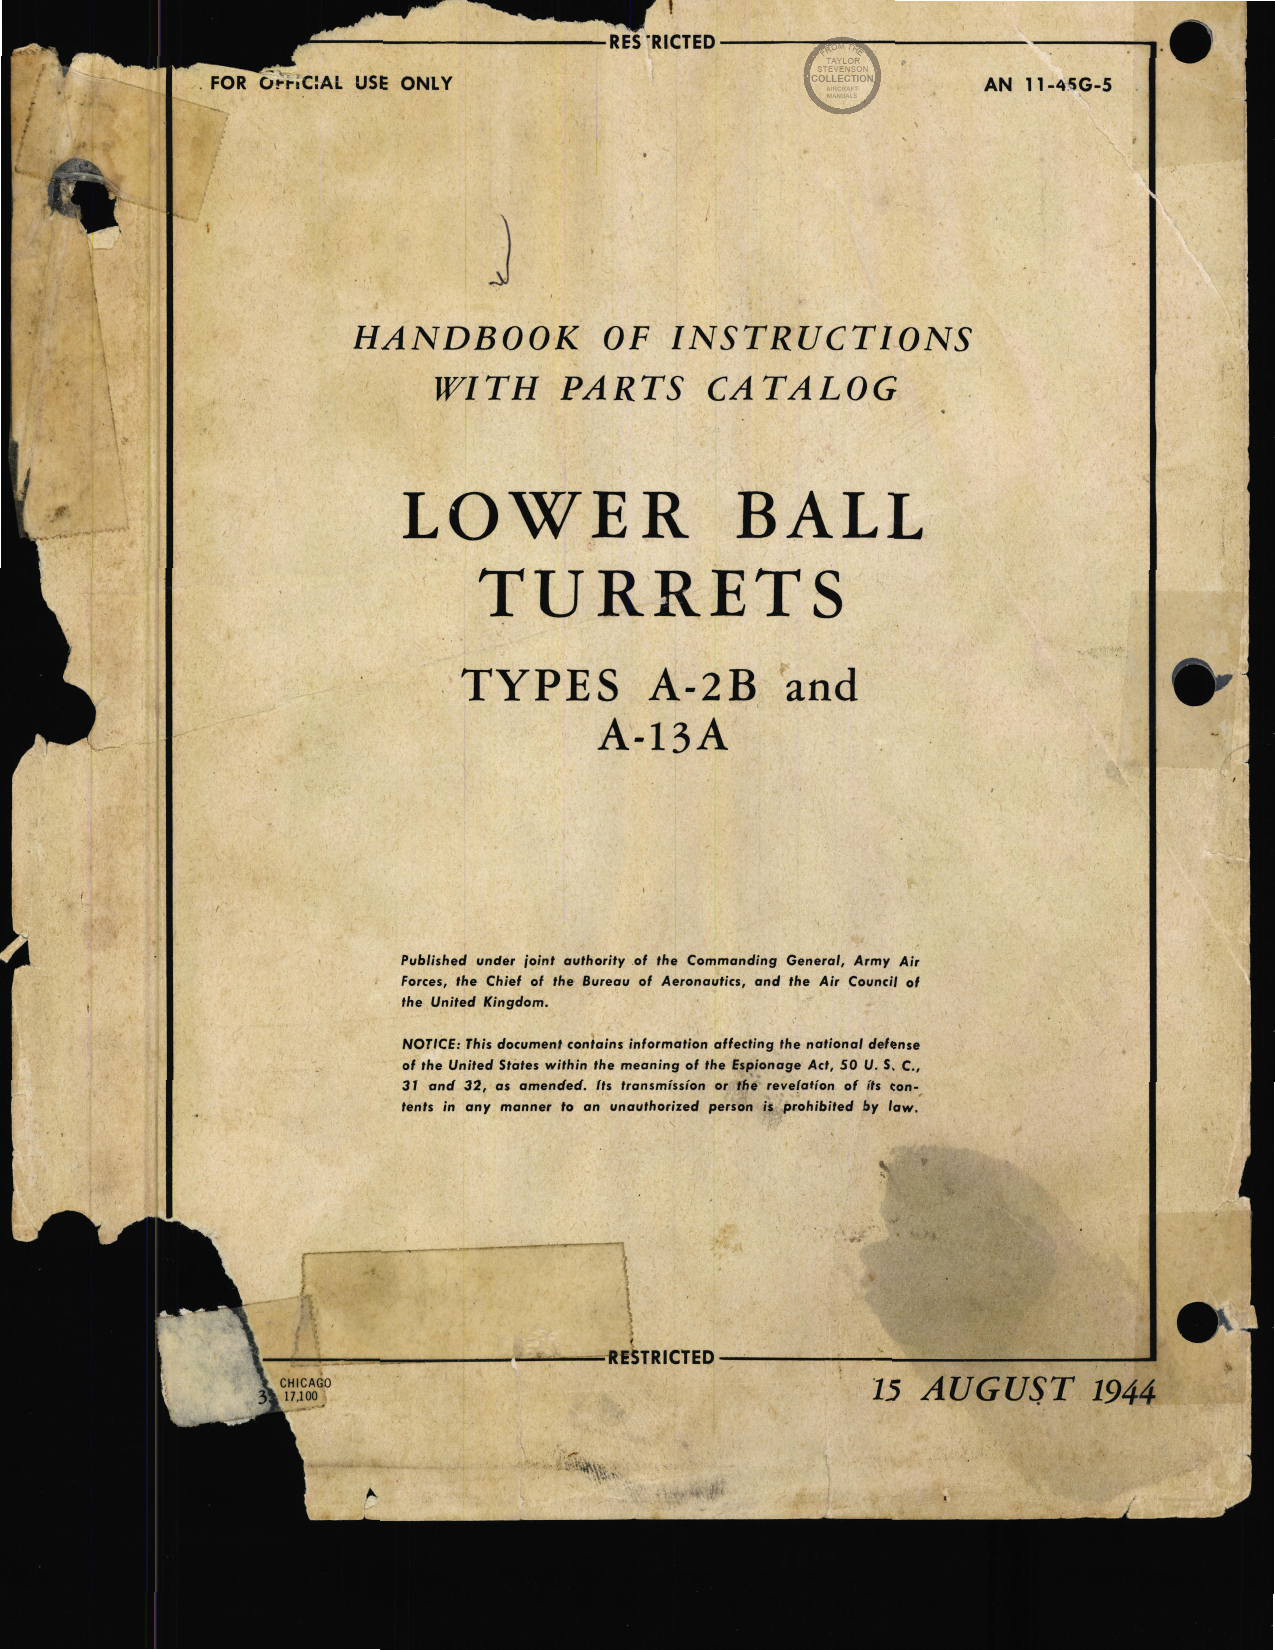 Sample page 1 from AirCorps Library document: Handbook of Instructions with Parts Catalog for Lower Ball Turret Types A-2B and A-13A